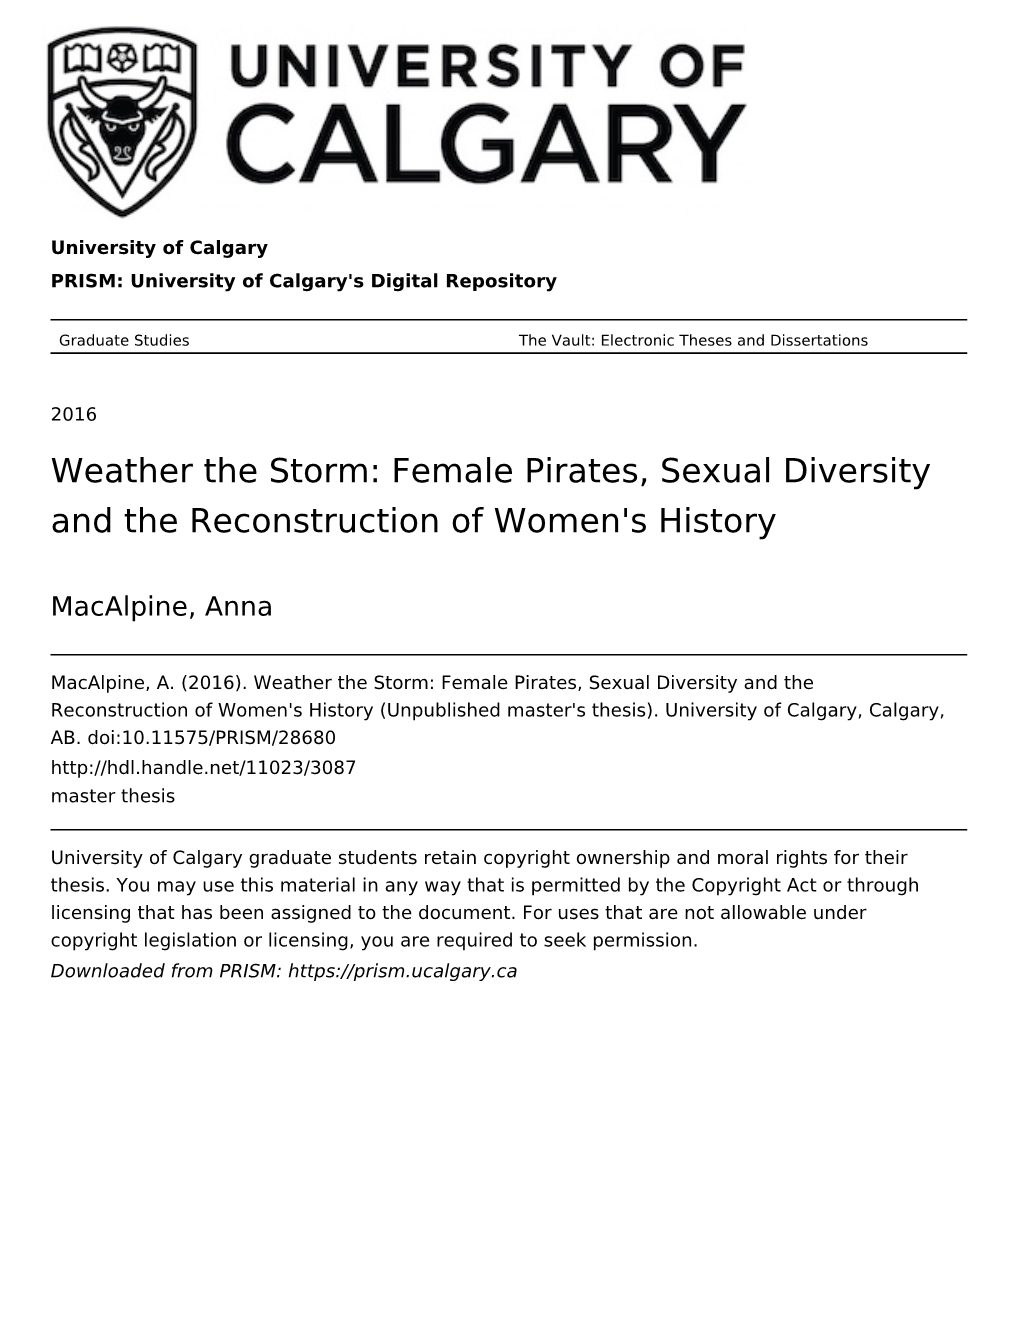 Weather the Storm: Female Pirates, Sexual Diversity and the Reconstruction of Women's History